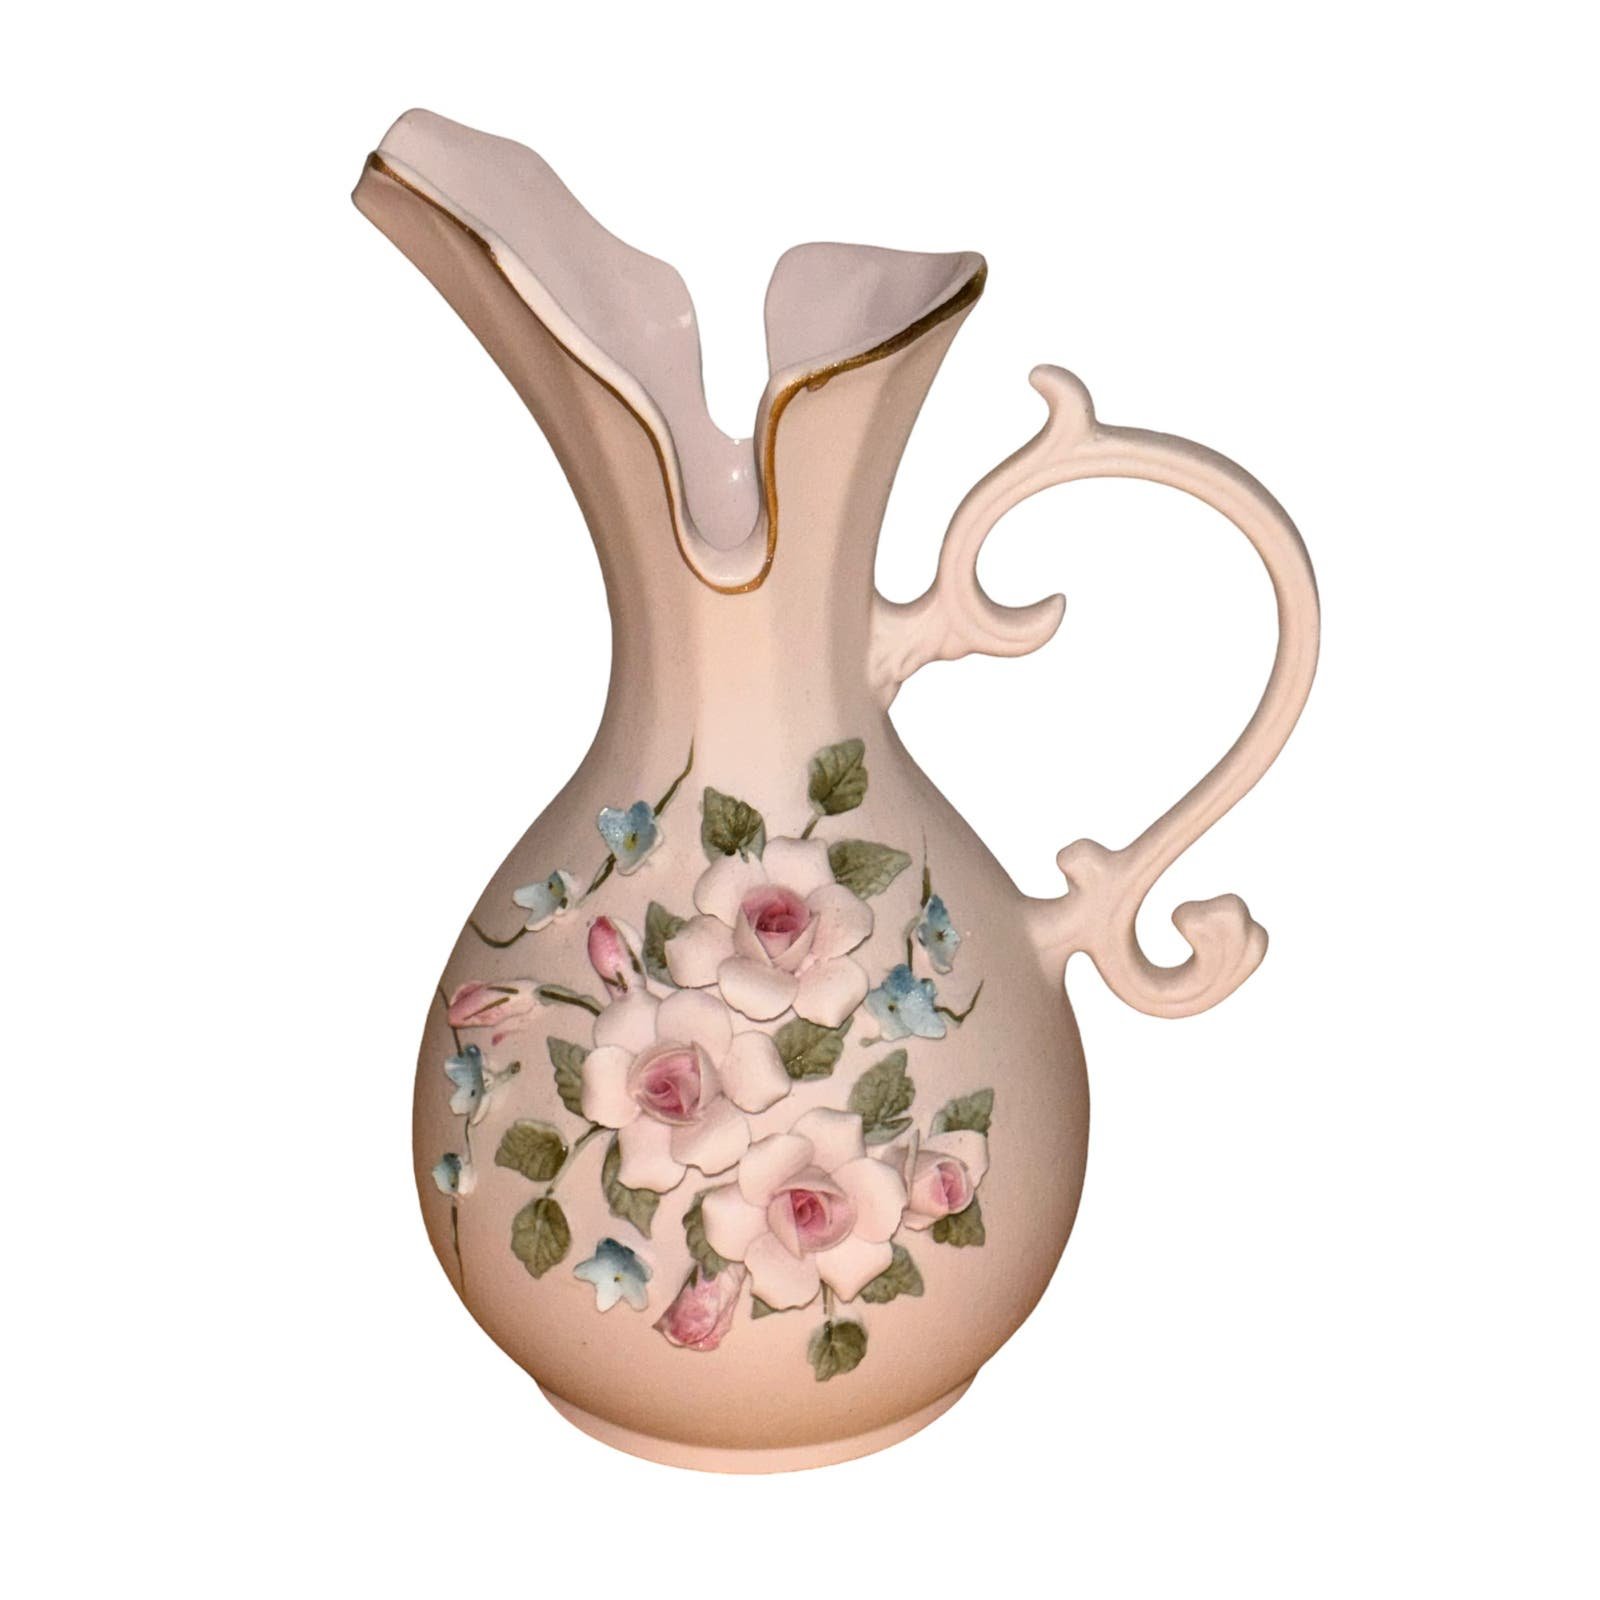 Vintage Lefton China Small Hand Painted Pale Pink 3D Roses Blue Flowers Pitcher jHBzpTsRj